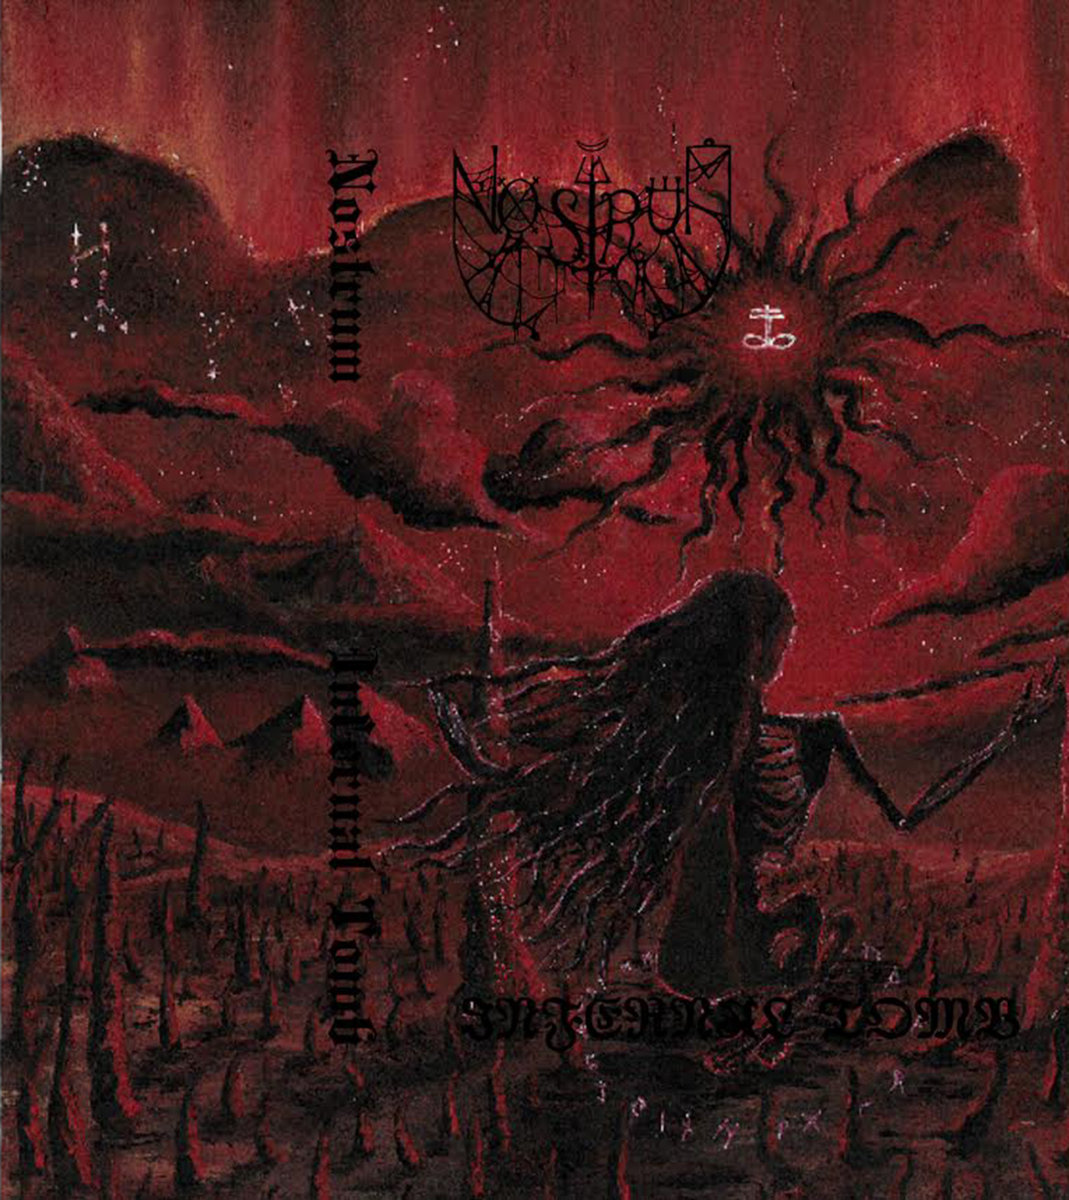 Nostrum; Infernal Tomb. Starts well with the leaden throb of doom, then goes a bit awry with sweet vocals, reminding me of dismal folk goths All About Eve. False alarm, the voice switched to Regan from The Exorcist vomiting a demon. Proper heavy, just right for Hallowe'en.